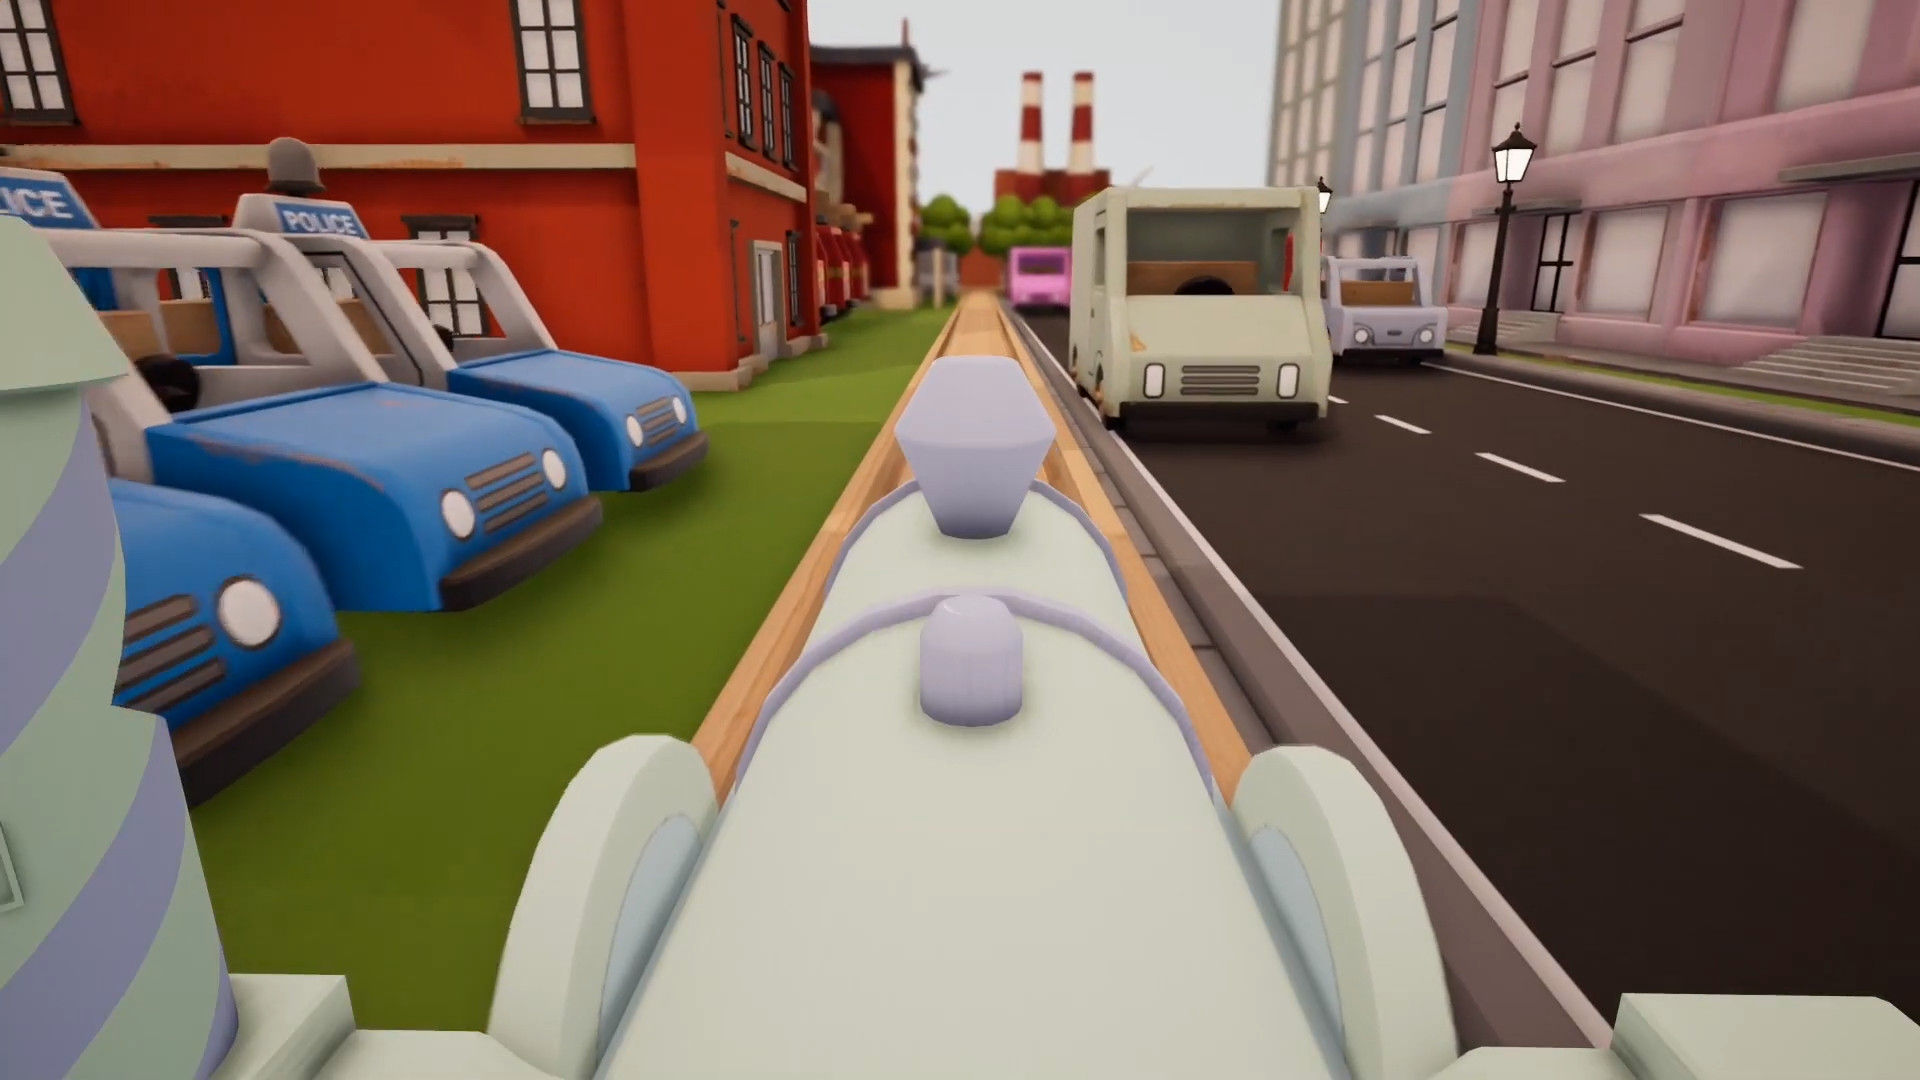 Tracks - The Family Friendly Open World Train Set Game Free Download